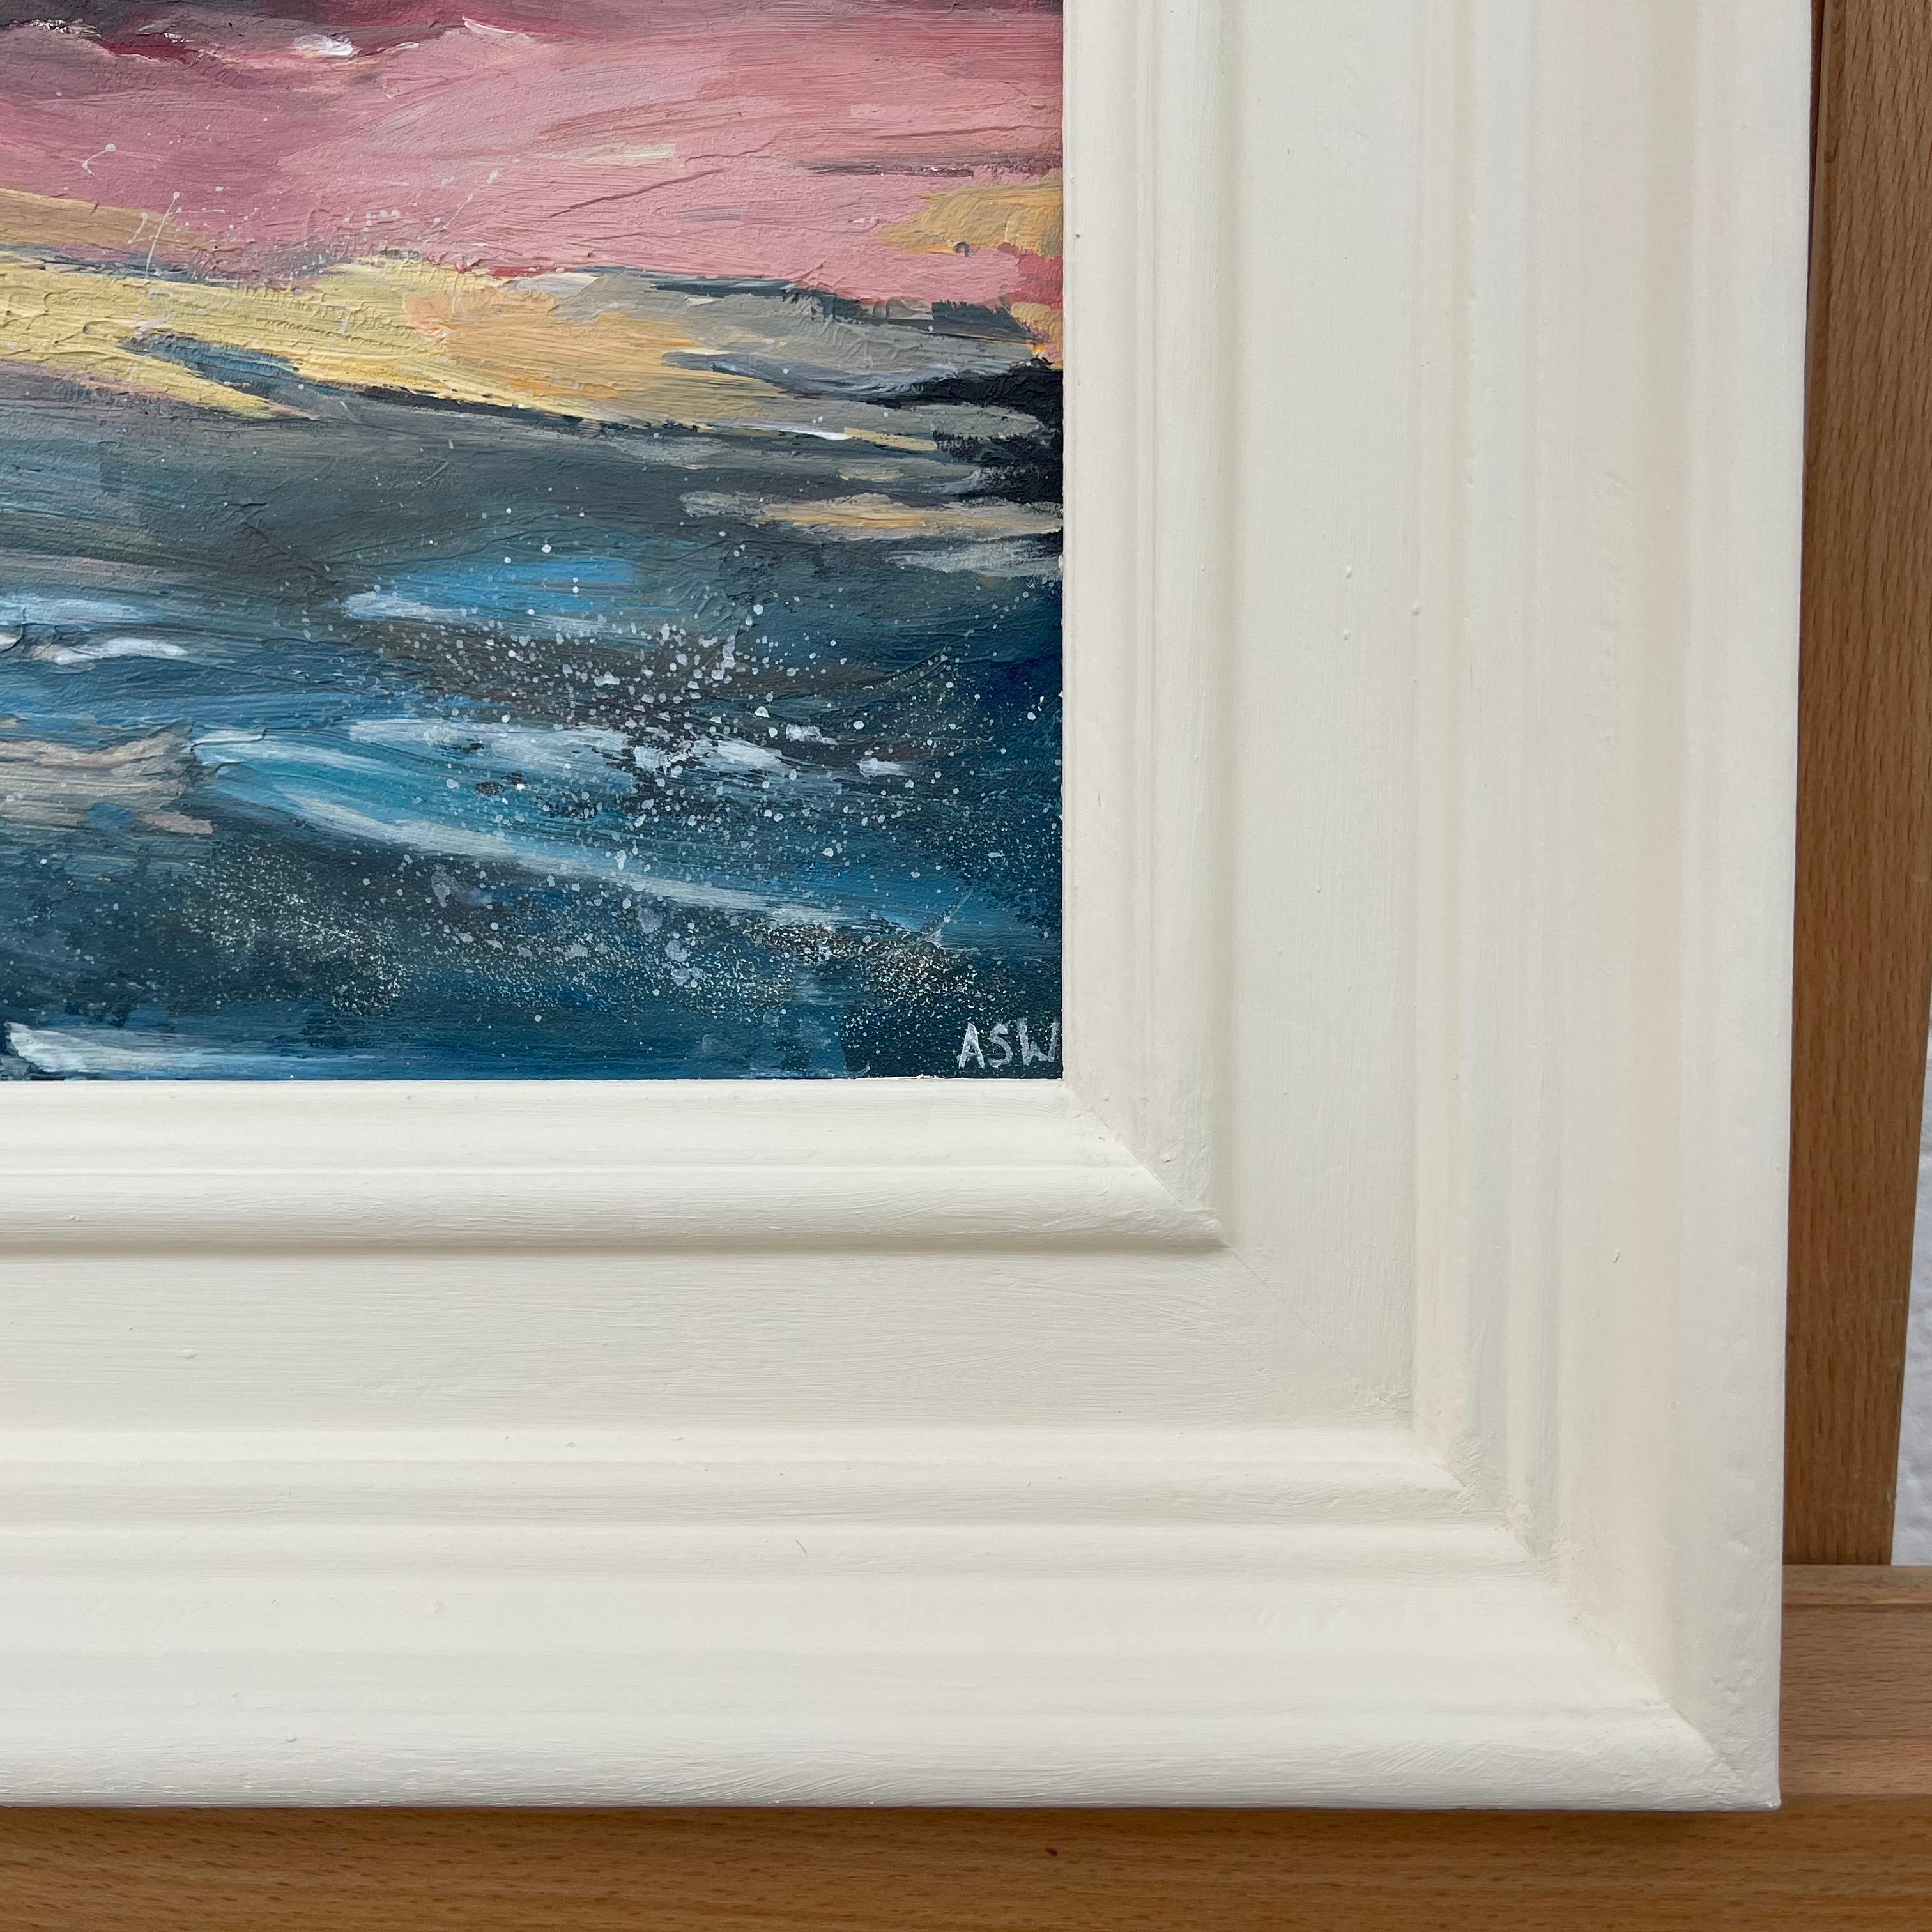 Miniature Abstract Beach Seascape Landscape Study by Contemporary British Artist - Gray Landscape Painting by Angela Wakefield